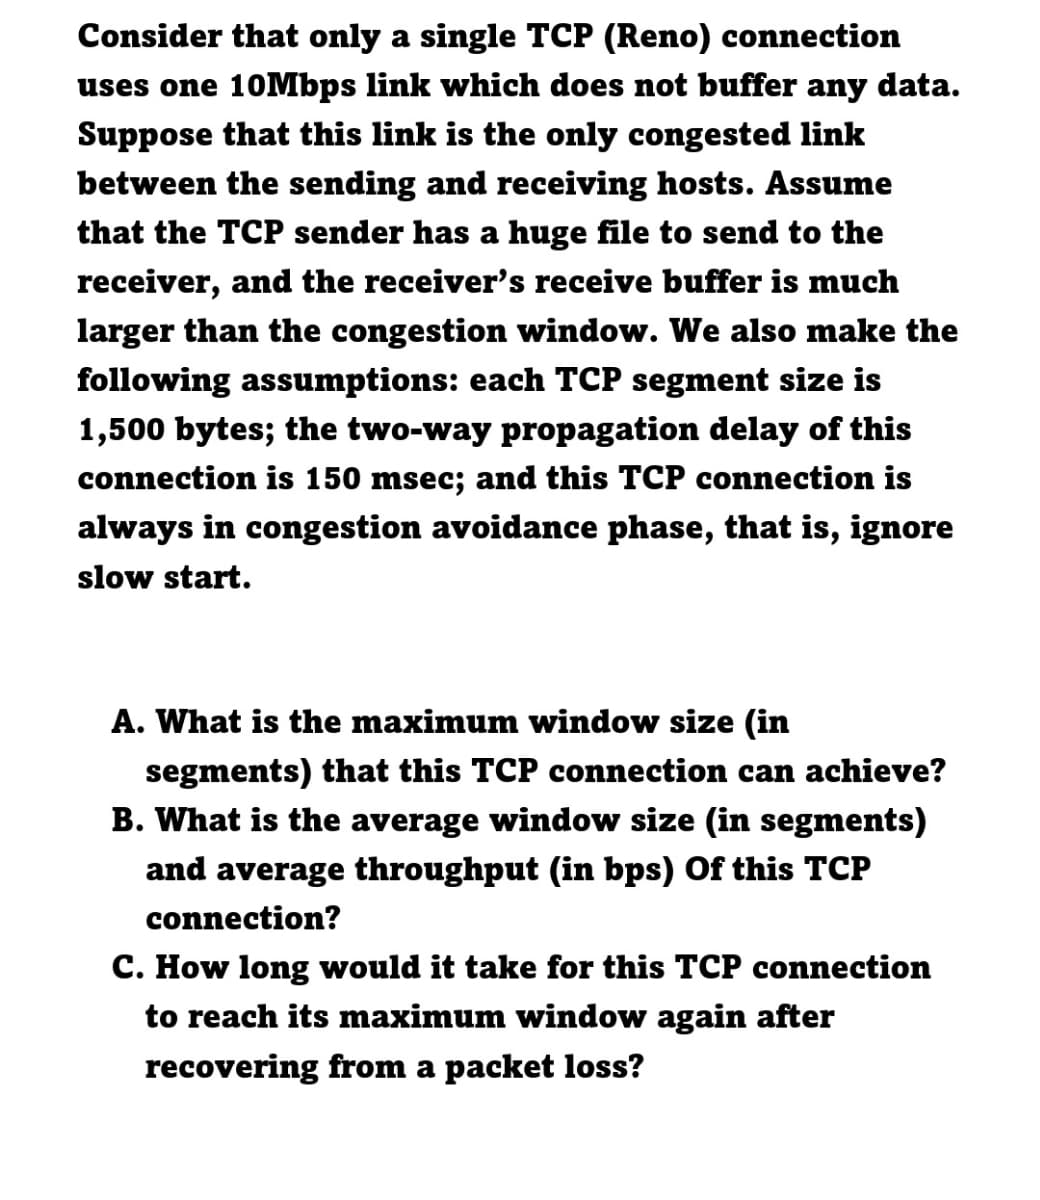 Consider that only a single TCP (Reno) connection
uses one 10Mbps link which does not buffer any data.
Suppose that this link is the only congested link
between the sending and receiving hosts. Assume
that the TCP sender has a huge file to send to the
receiver, and the receiver's receive buffer is much
larger than the congestion window. We also make the
following assumptions: each TCP segment size is
1,500 bytes; the two-way propagation delay of this
connection is 150 msec; and this TCP connection is
always in congestion avoidance phase, that is, ignore
slow start.
A. What is the maximum window size (in
segments) that this TCP connection can achieve?
B. What is the average window size (in segments)
and average throughput (in bps) Of this TCP
connection?
C. How long would it take for this TCP connection
to reach its maximum window again after
recovering from a packet loss?